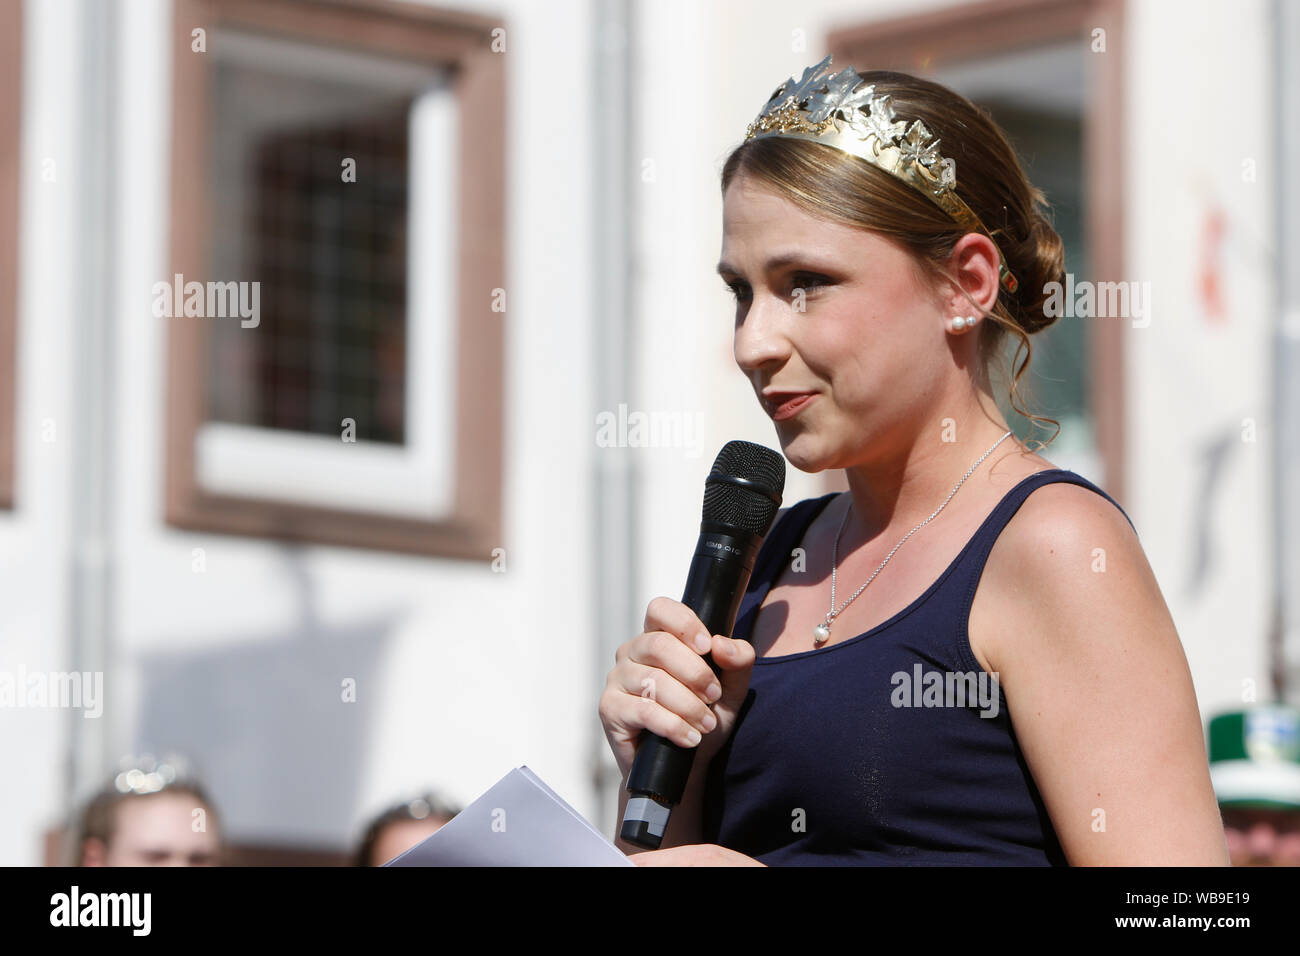 Worms, Germany. 24th August 2019. The Rhine-Hessian wine queen Anna Göhring addresses the opening ceremony of the Backfischfest 2019. The largest wine and funfair along the river Rhine, the Backfischfest started in Worms with the traditional handing over of power from the Lord Mayor to the mayor of the fishermen’s lea. The ceremony was framed by dances and music. Stock Photo